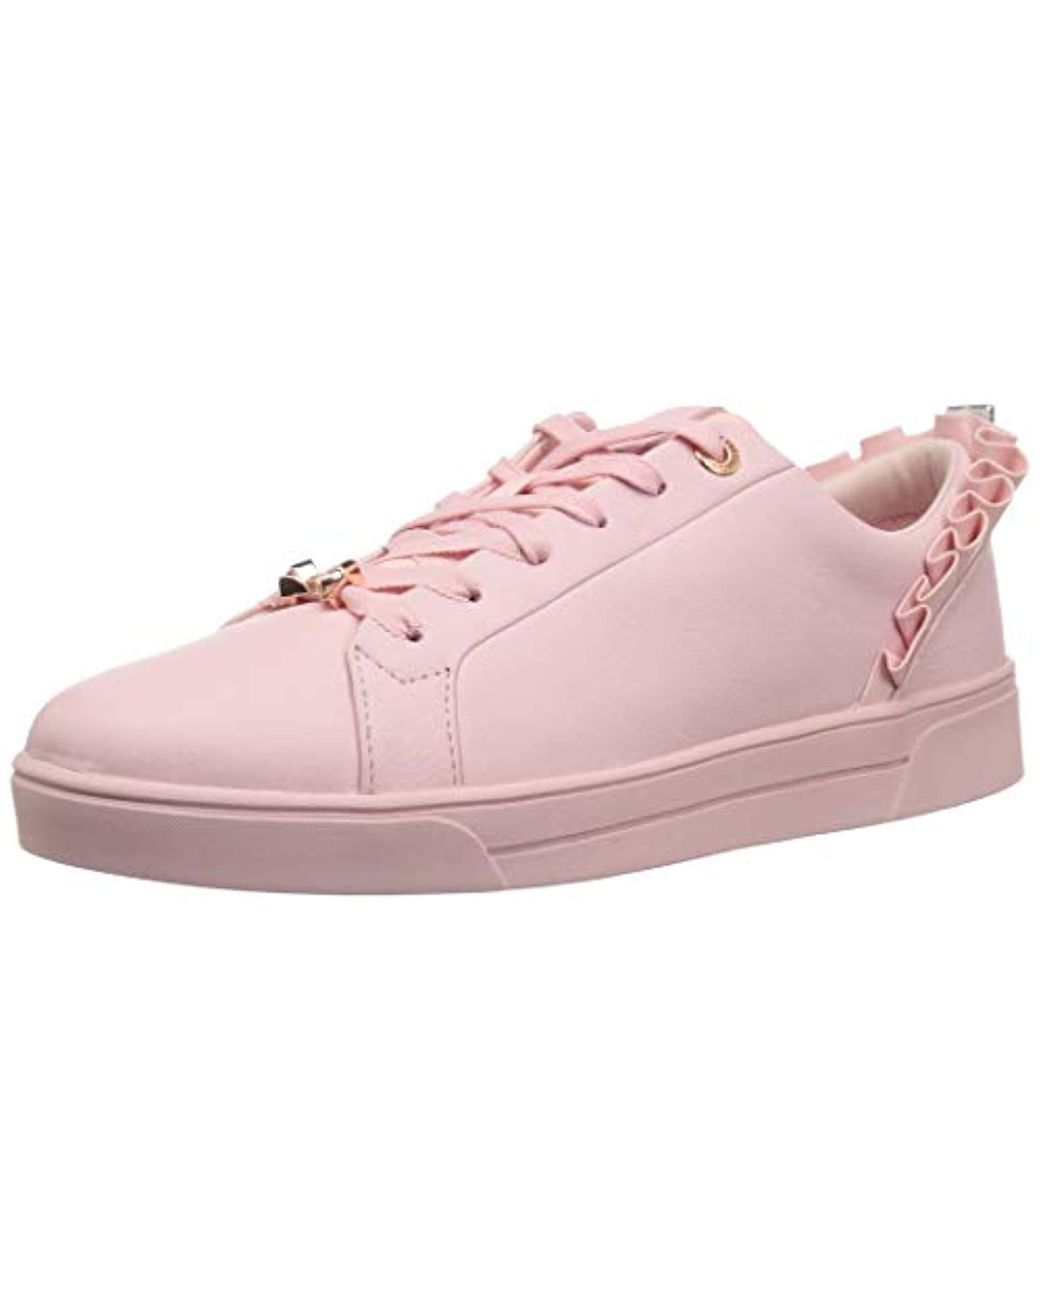 Ted Baker Astrina Sneaker in Mink Pink Leather (Pink) - Save 19% - Lyst